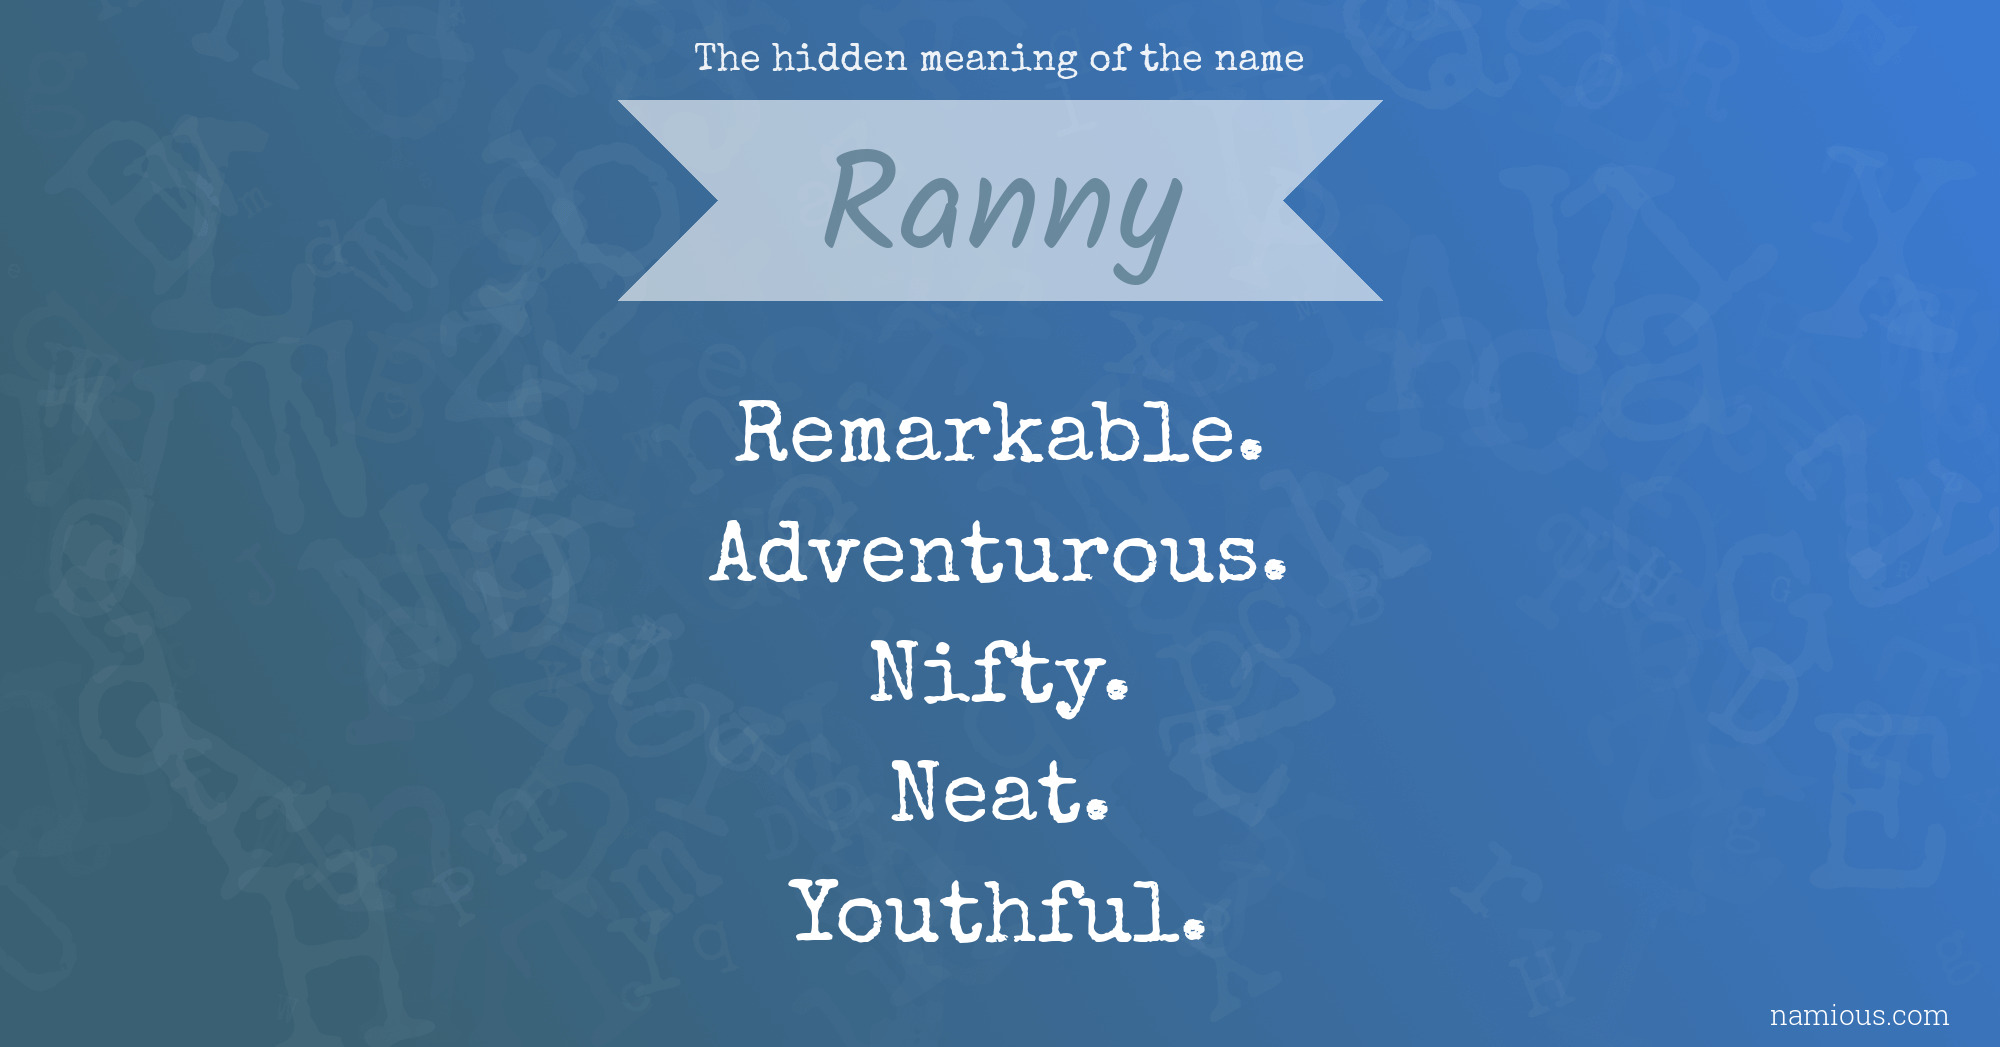 The hidden meaning of the name Ranny